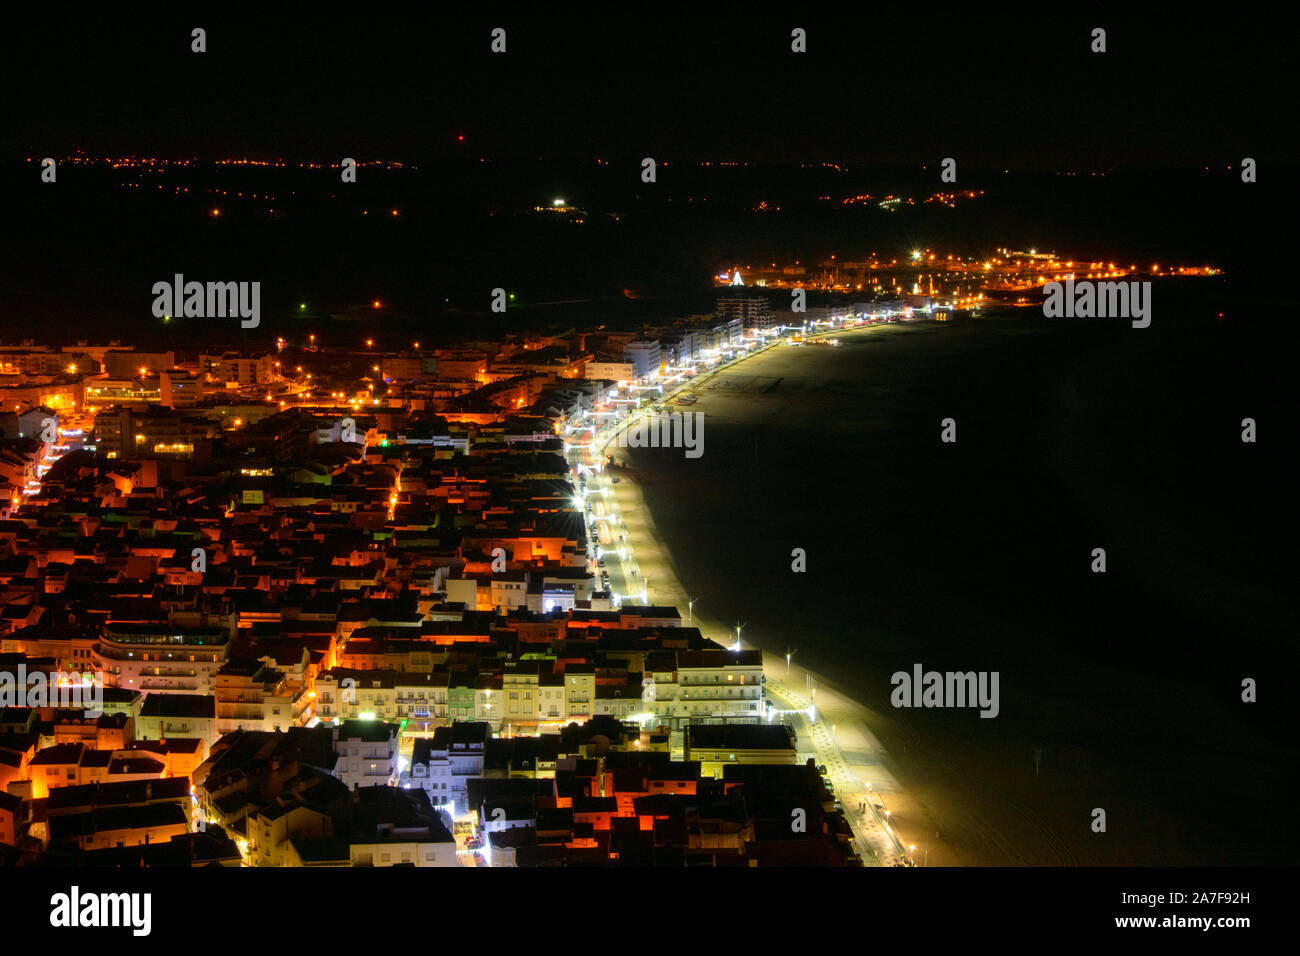 General night view of Nazare Portugal from the viewpoint at Sitio Stock Photo